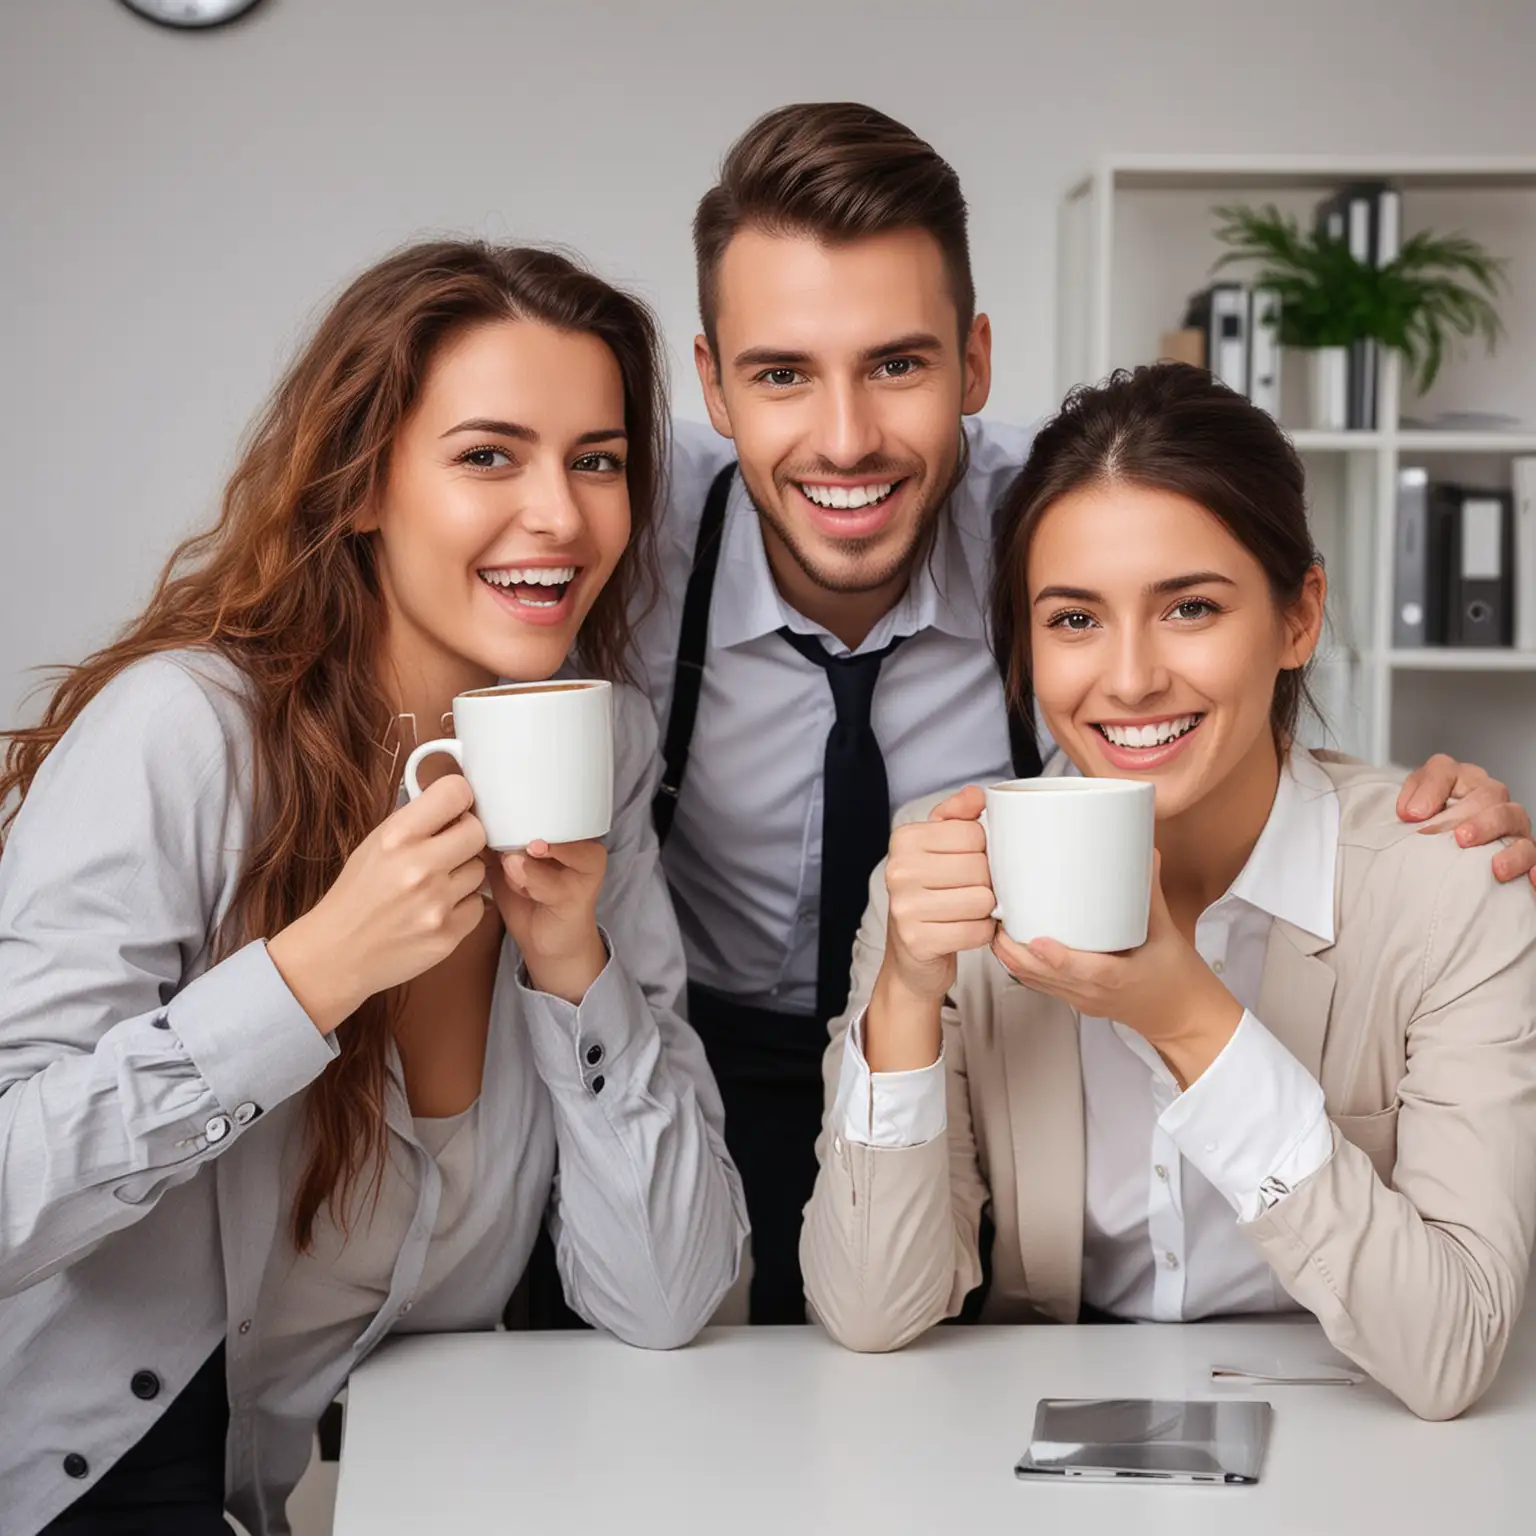 Show me an image of three happy coworkers for having a cup of coffee at the office. 
